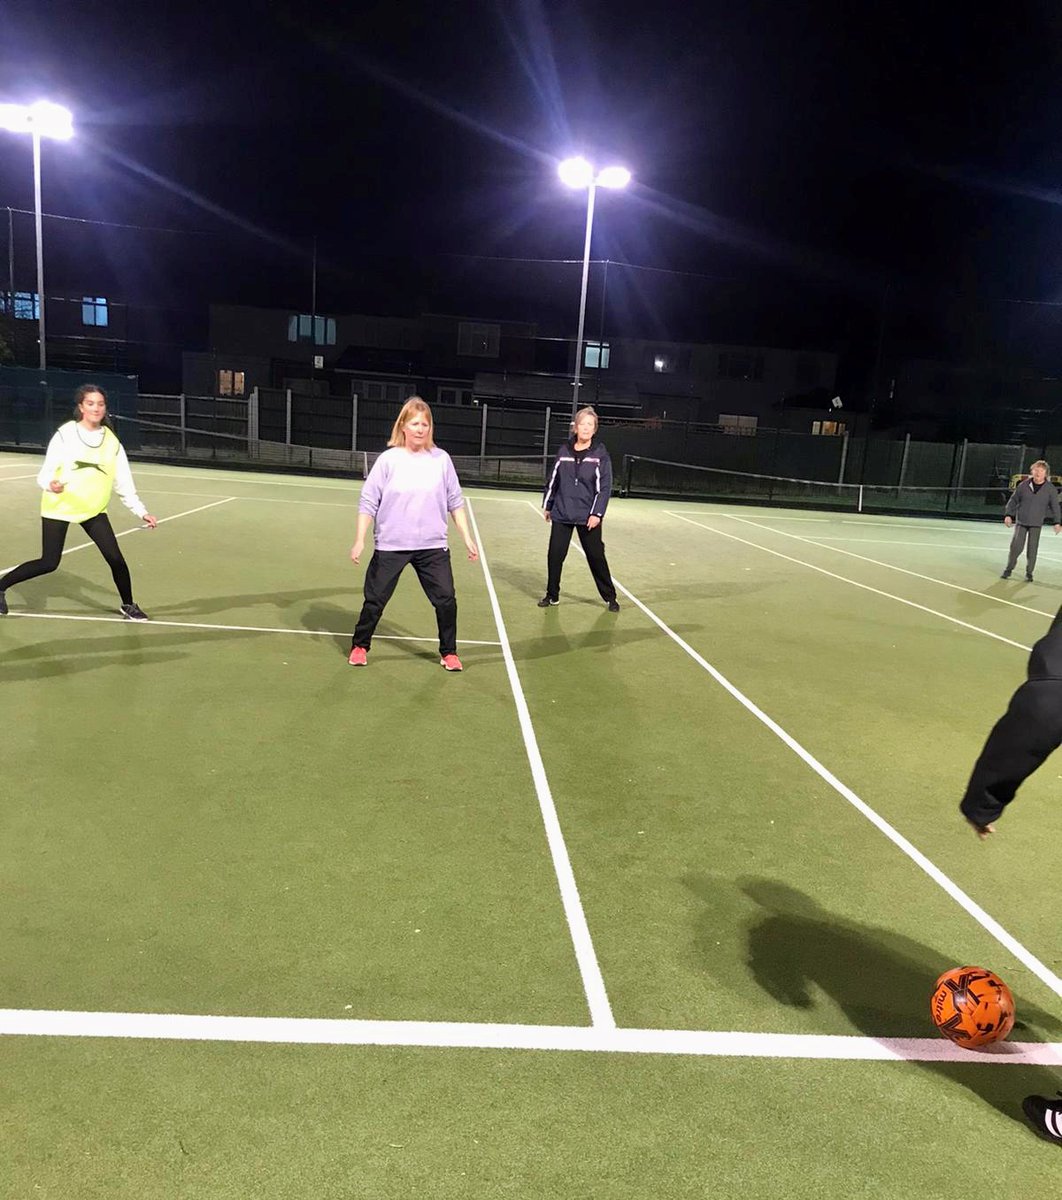 Dust off those trainers its time to try womens walking football! Don't forget to book in advance bookwhen.com/mpsports
#womenswalkingfootball #hallgreenbirmingham #solihullgetactive #menopausefitness #mentalhealthishealth